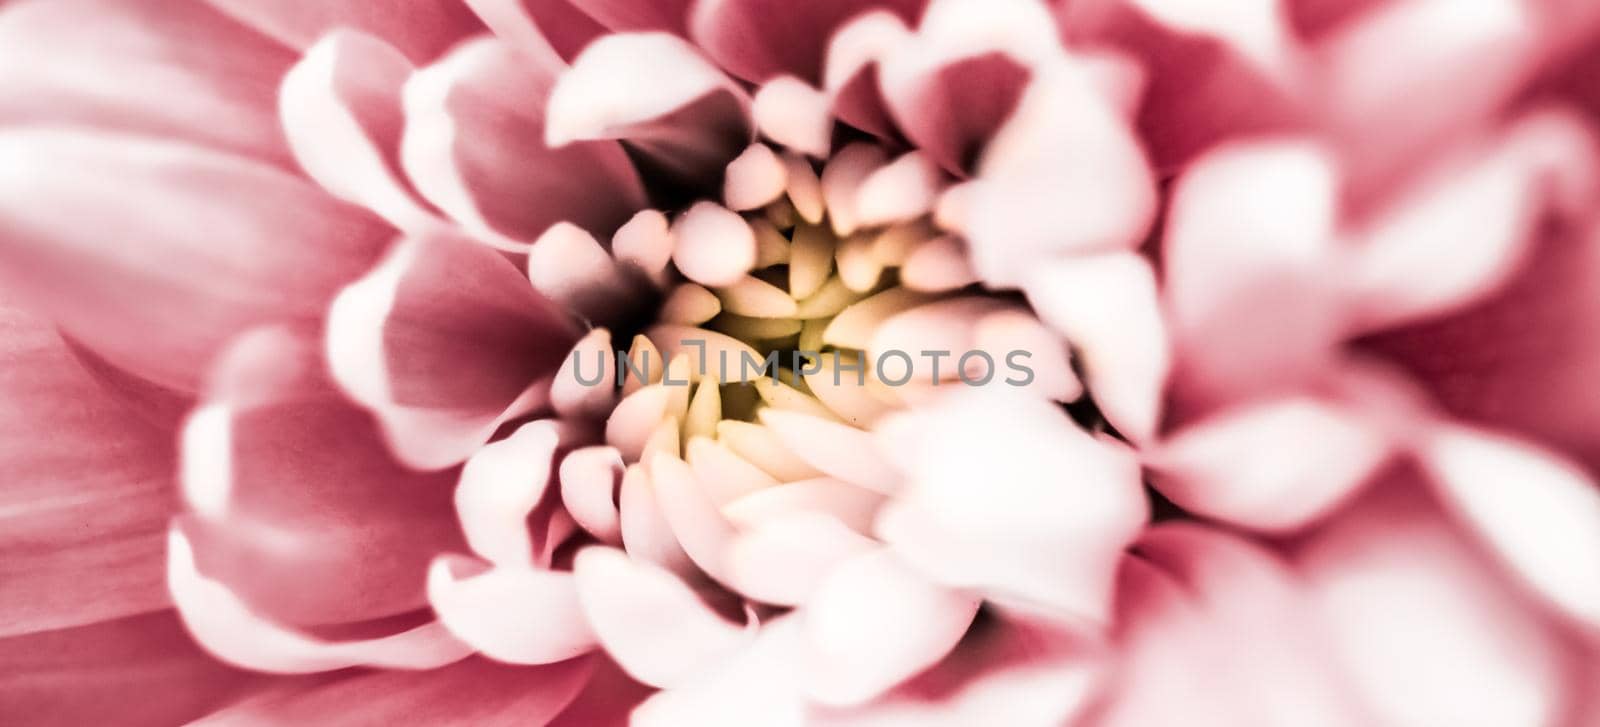 Pink daisy flower petals in bloom, abstract floral blossom art background, flowers in spring nature for perfume scent, wedding, luxury beauty brand holiday design by Anneleven